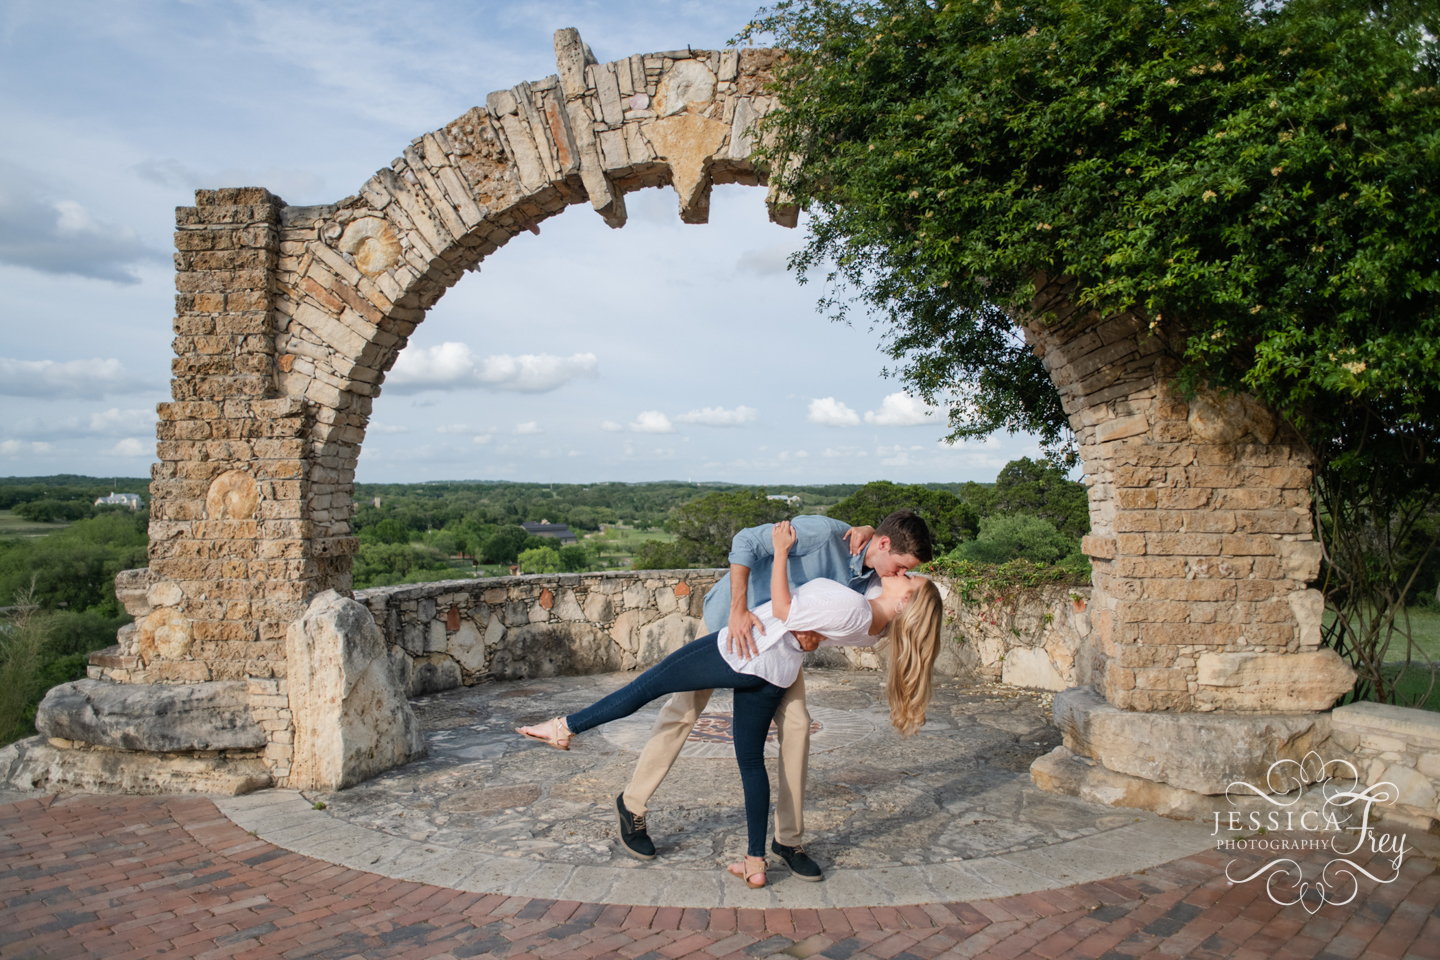 Wedding Venue in Dripping Springs with great views of the Texas Hill Country